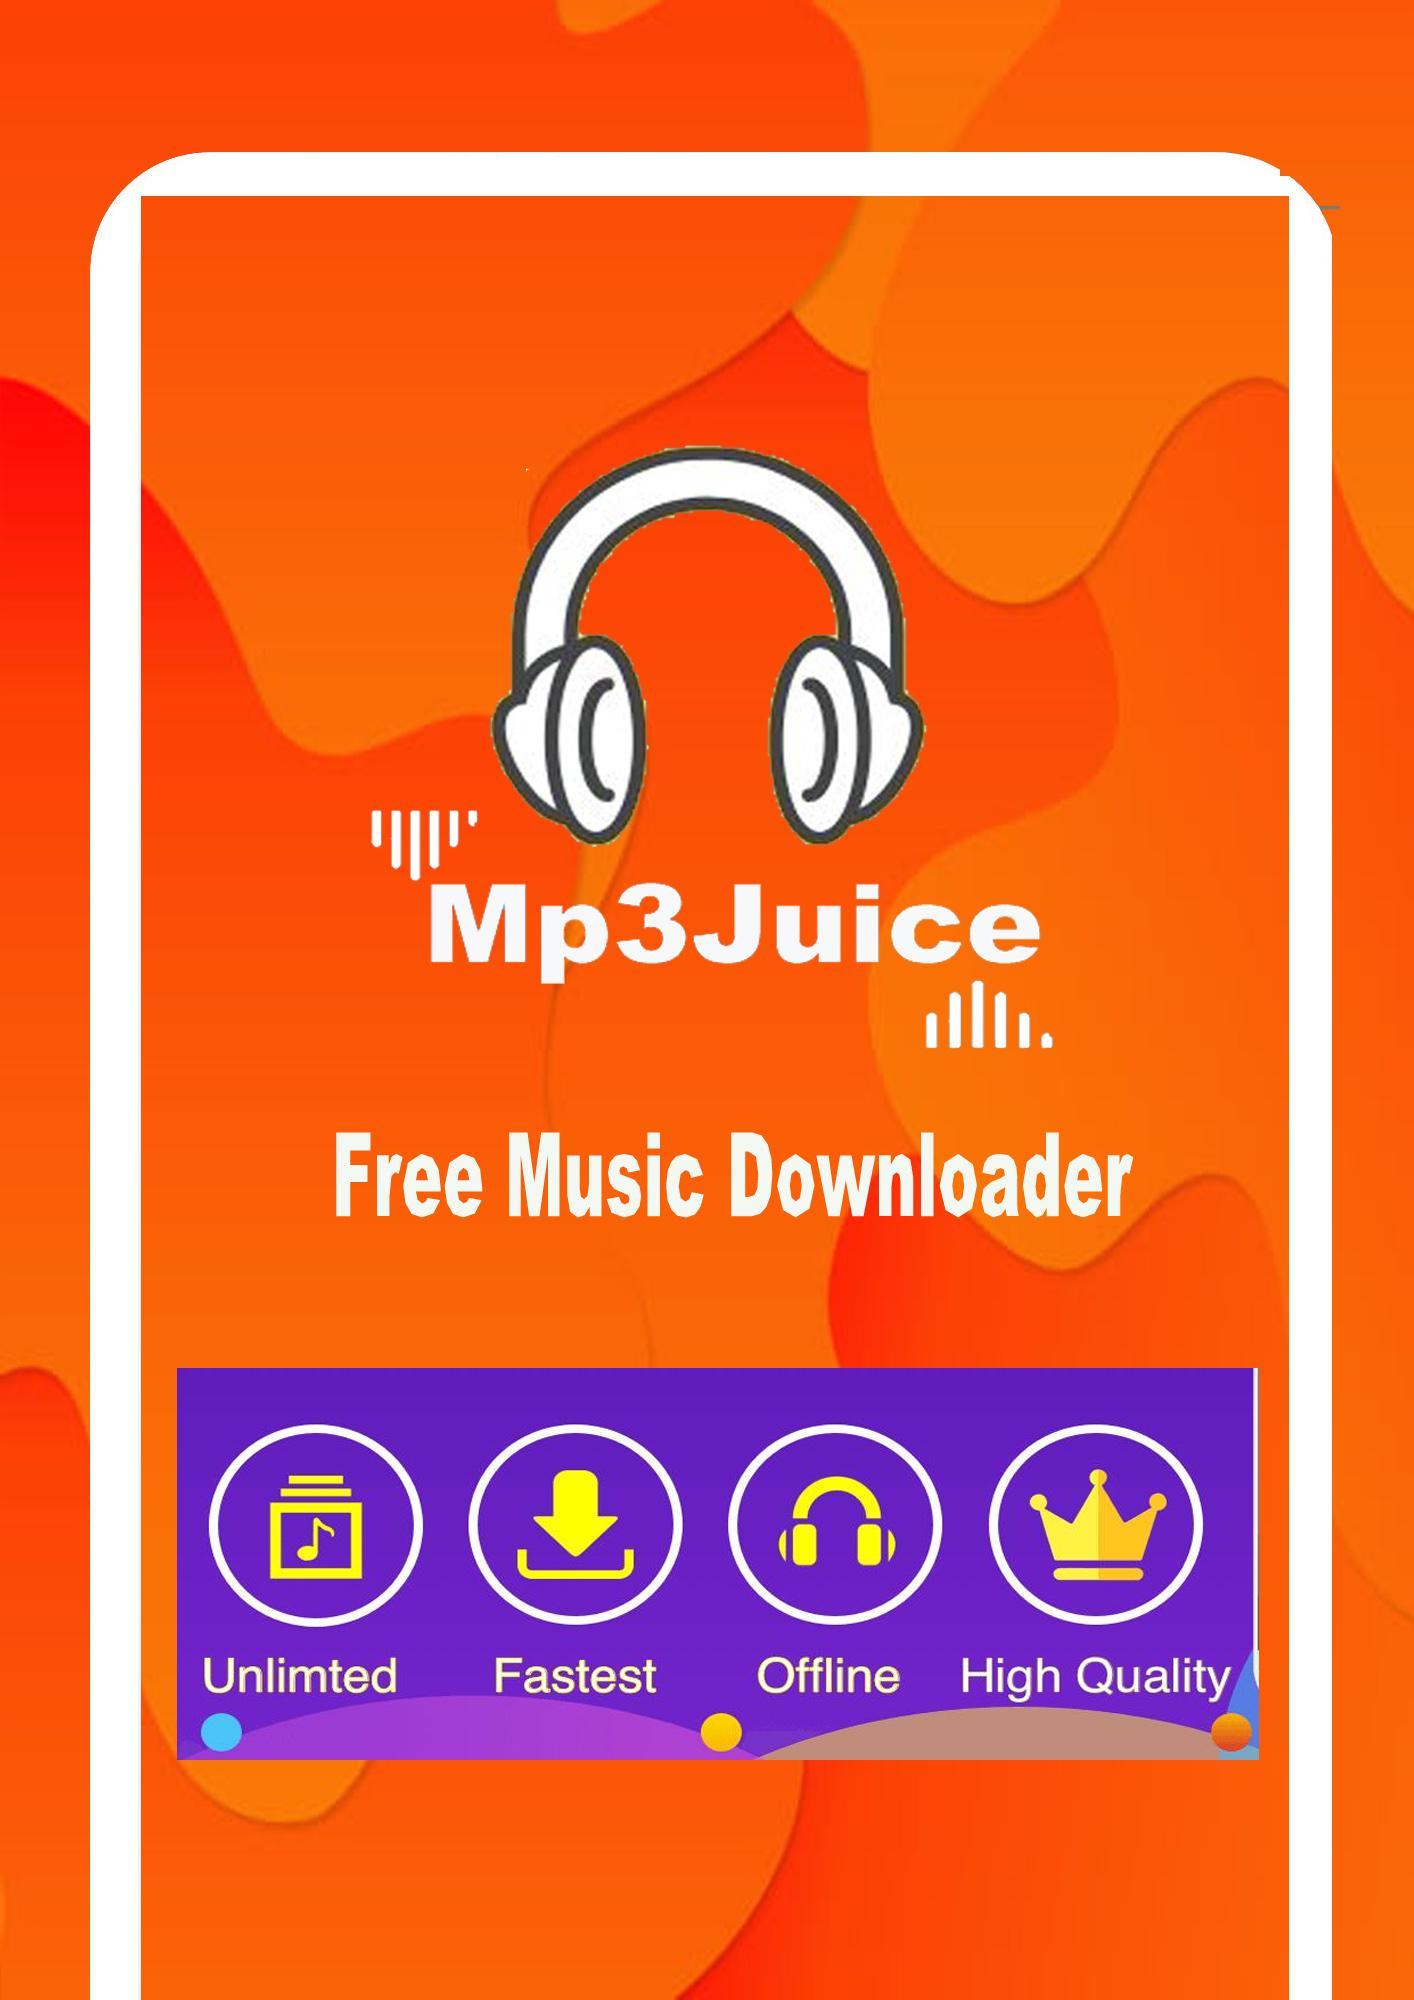 mp3juice download free mp3